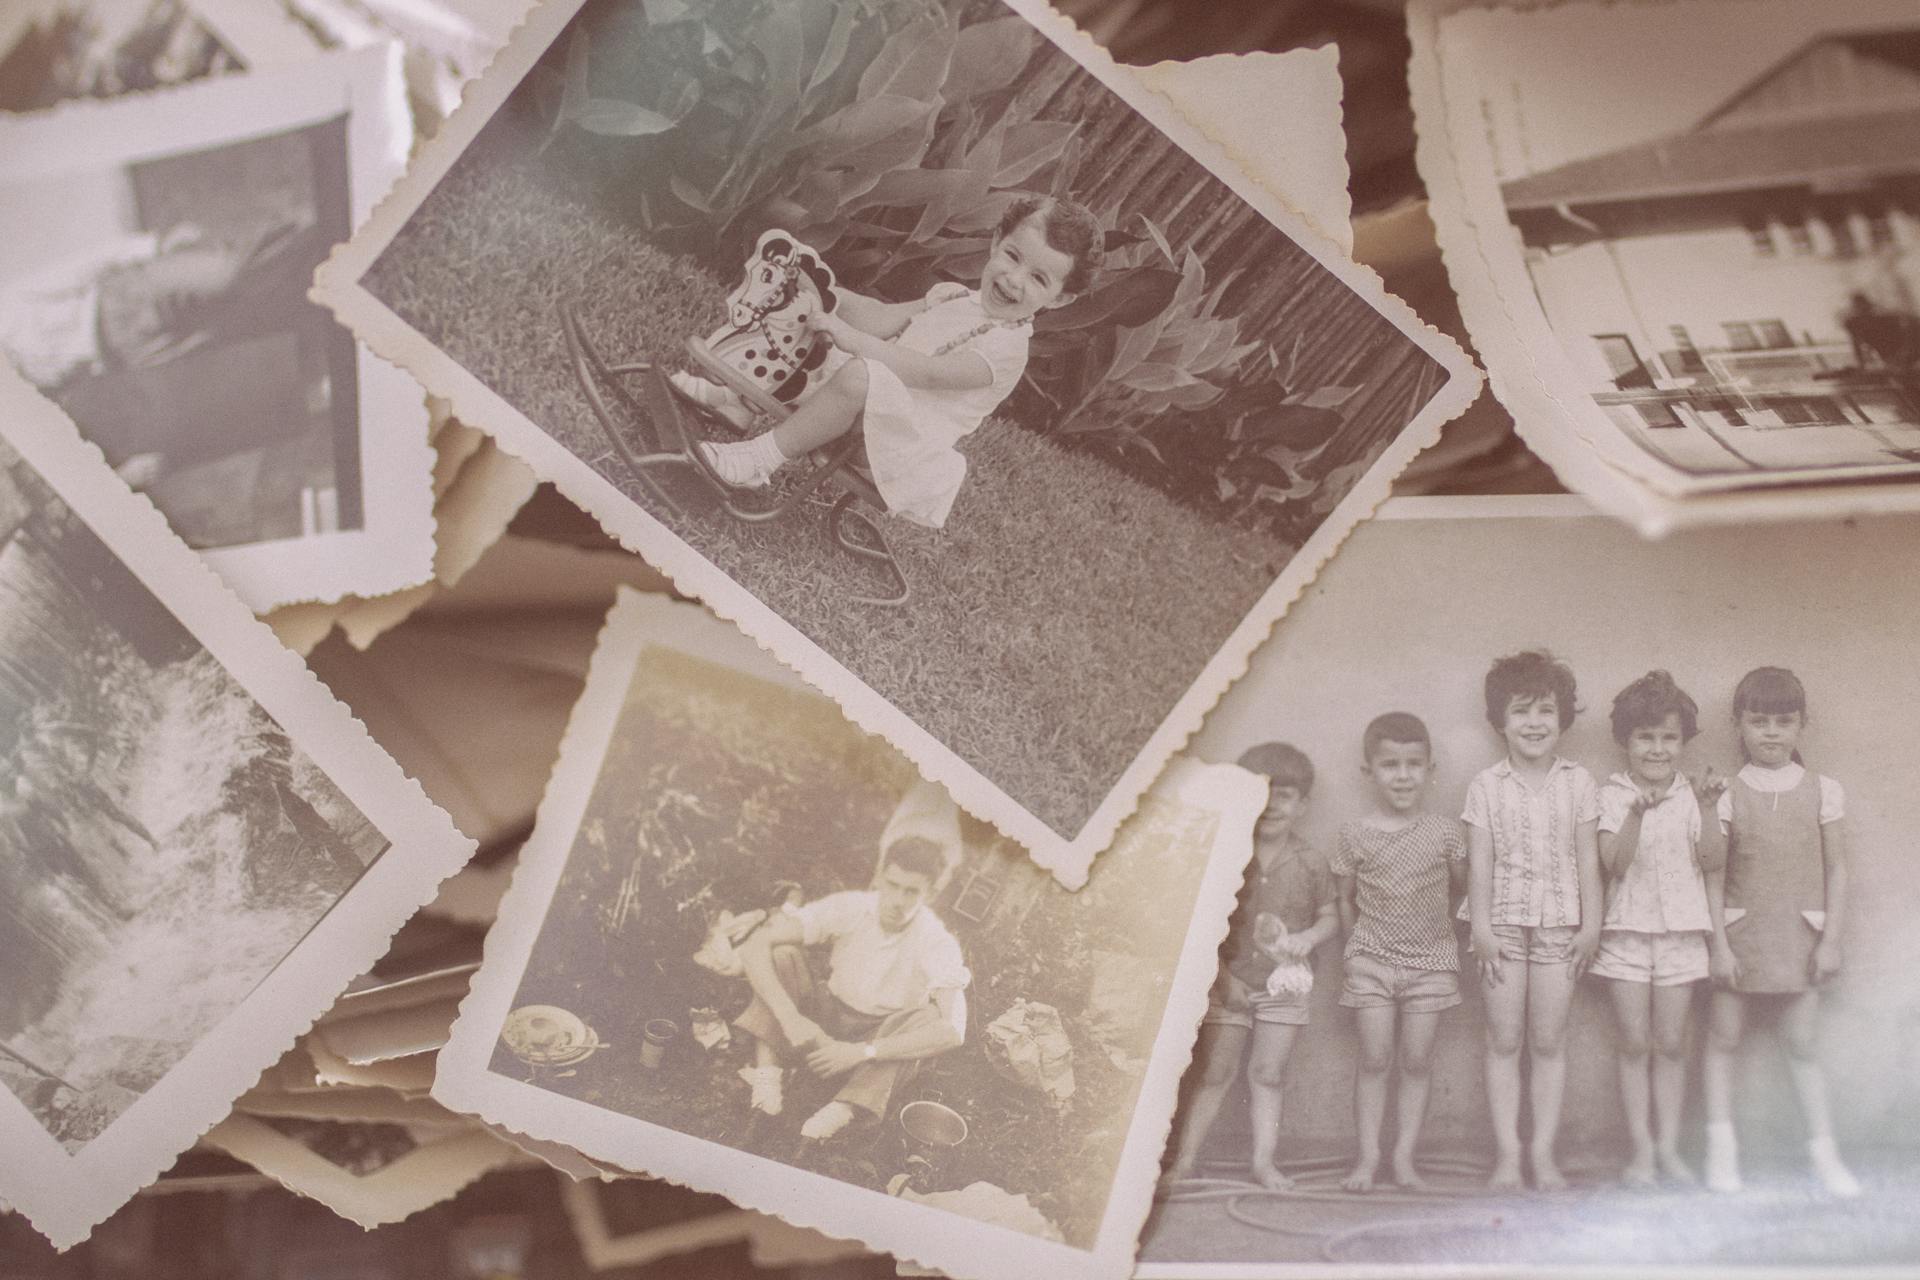 Old photographs of a child | Source: Pexels